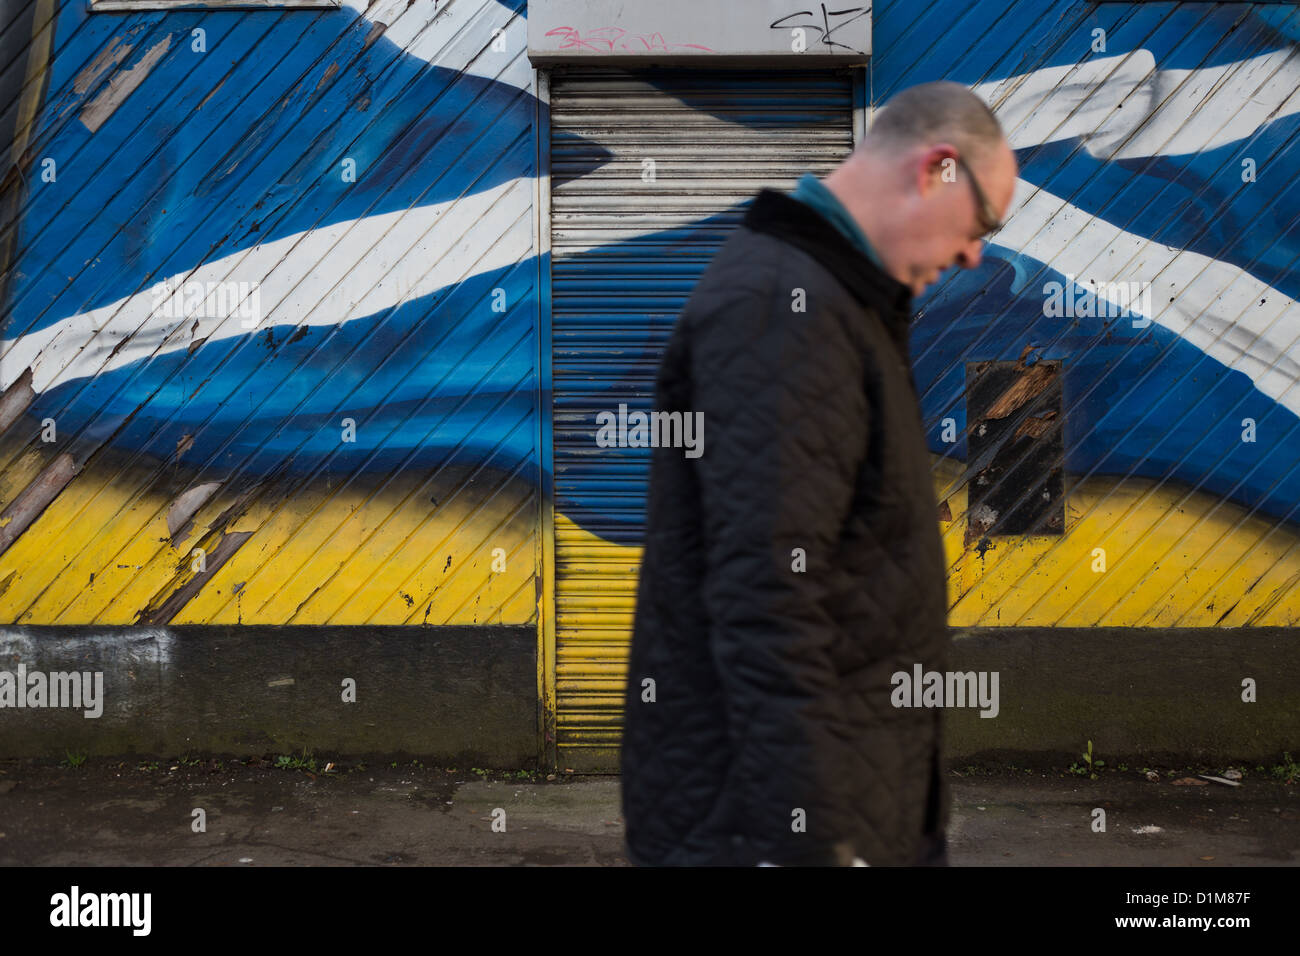 Scottish Saltire flag painted on the exterior wall of a pub in Govanhill, Glasgow, Scotland. Stock Photo